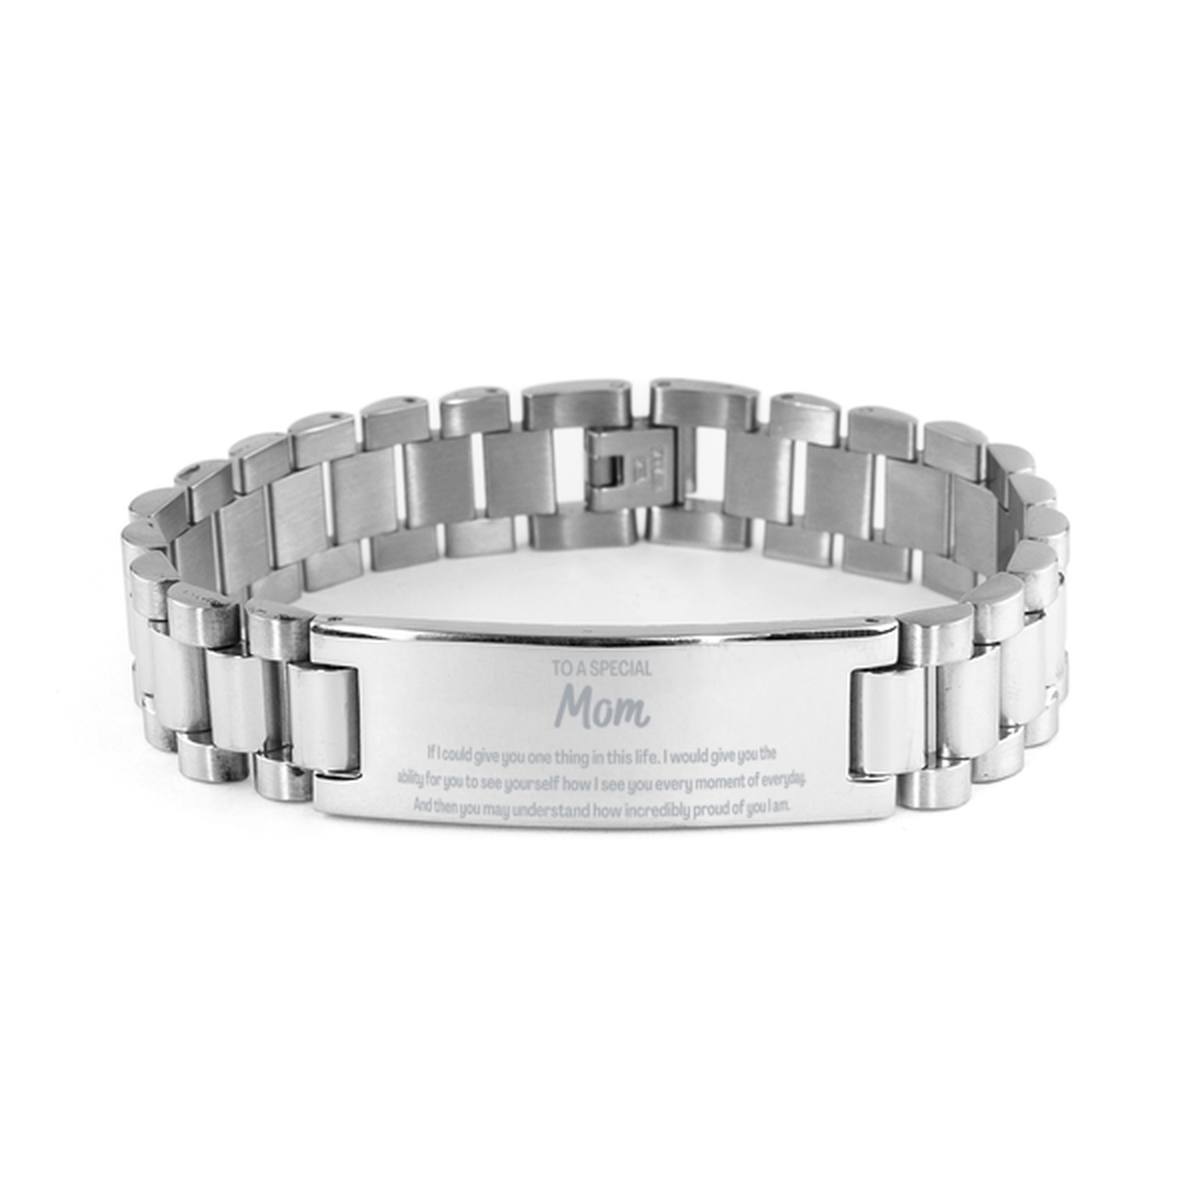 To My Mom Ladder Stainless Steel Bracelet, Gifts For Mom Engraved, Inspirational Gifts for Christmas Birthday, Epic Gifts for Mom To A Special Mom how incredibly proud of you I am